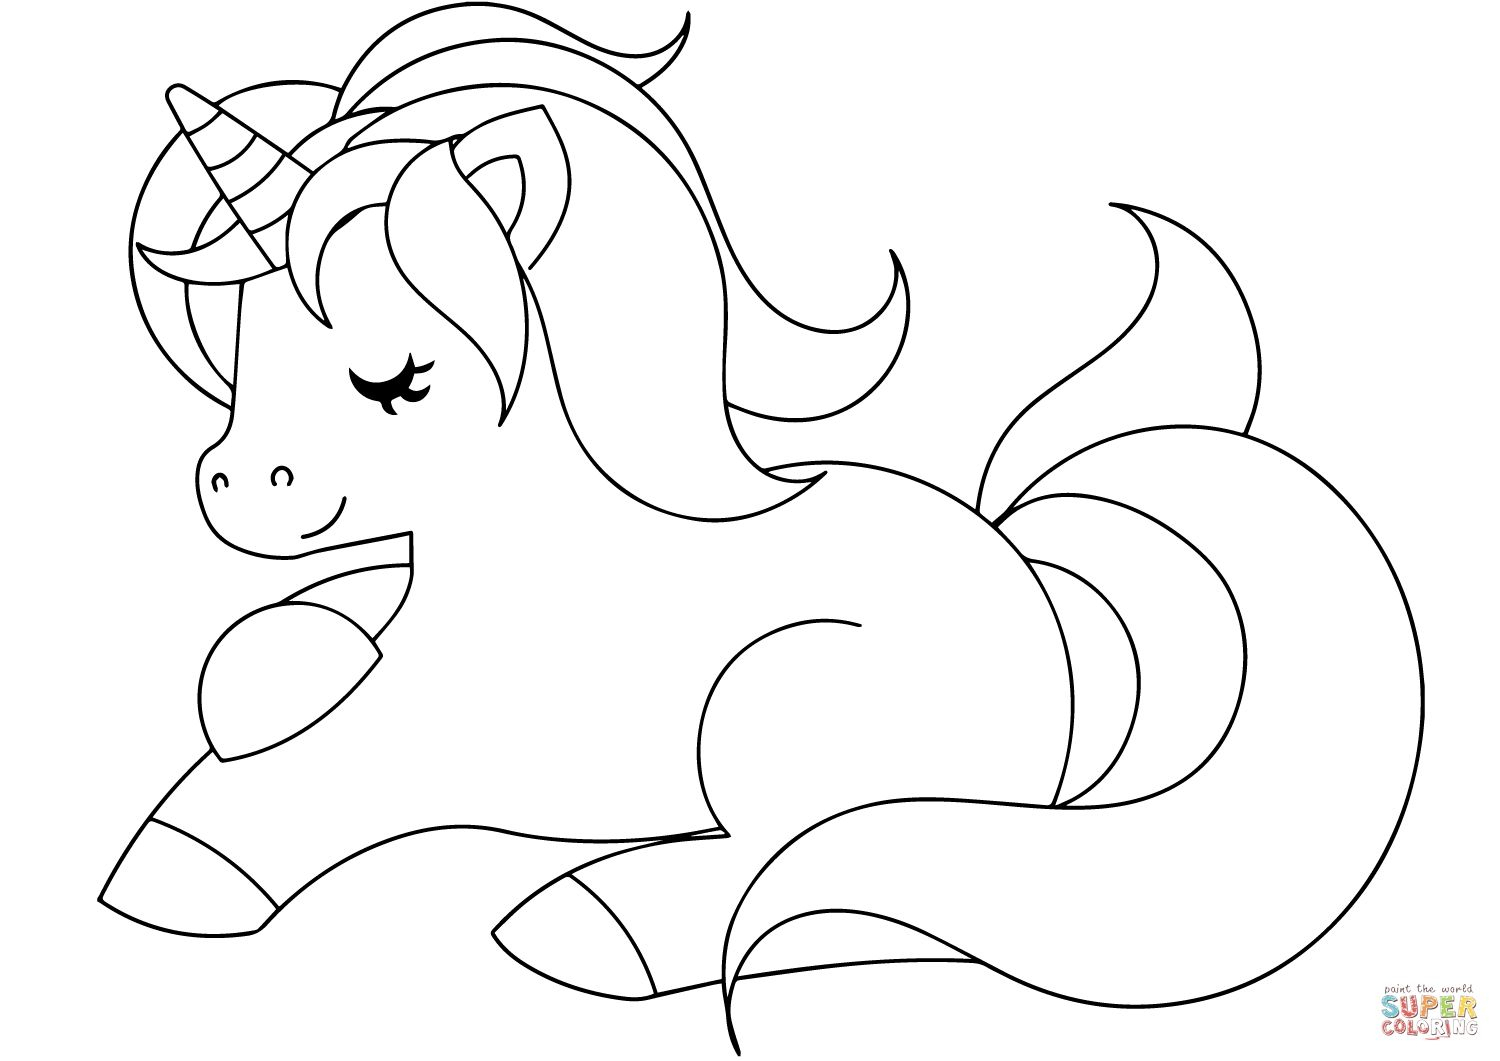 Cute Unicorn Coloring Page | Free Printable Coloring Pages With - Free Coloring Pages Com Printable